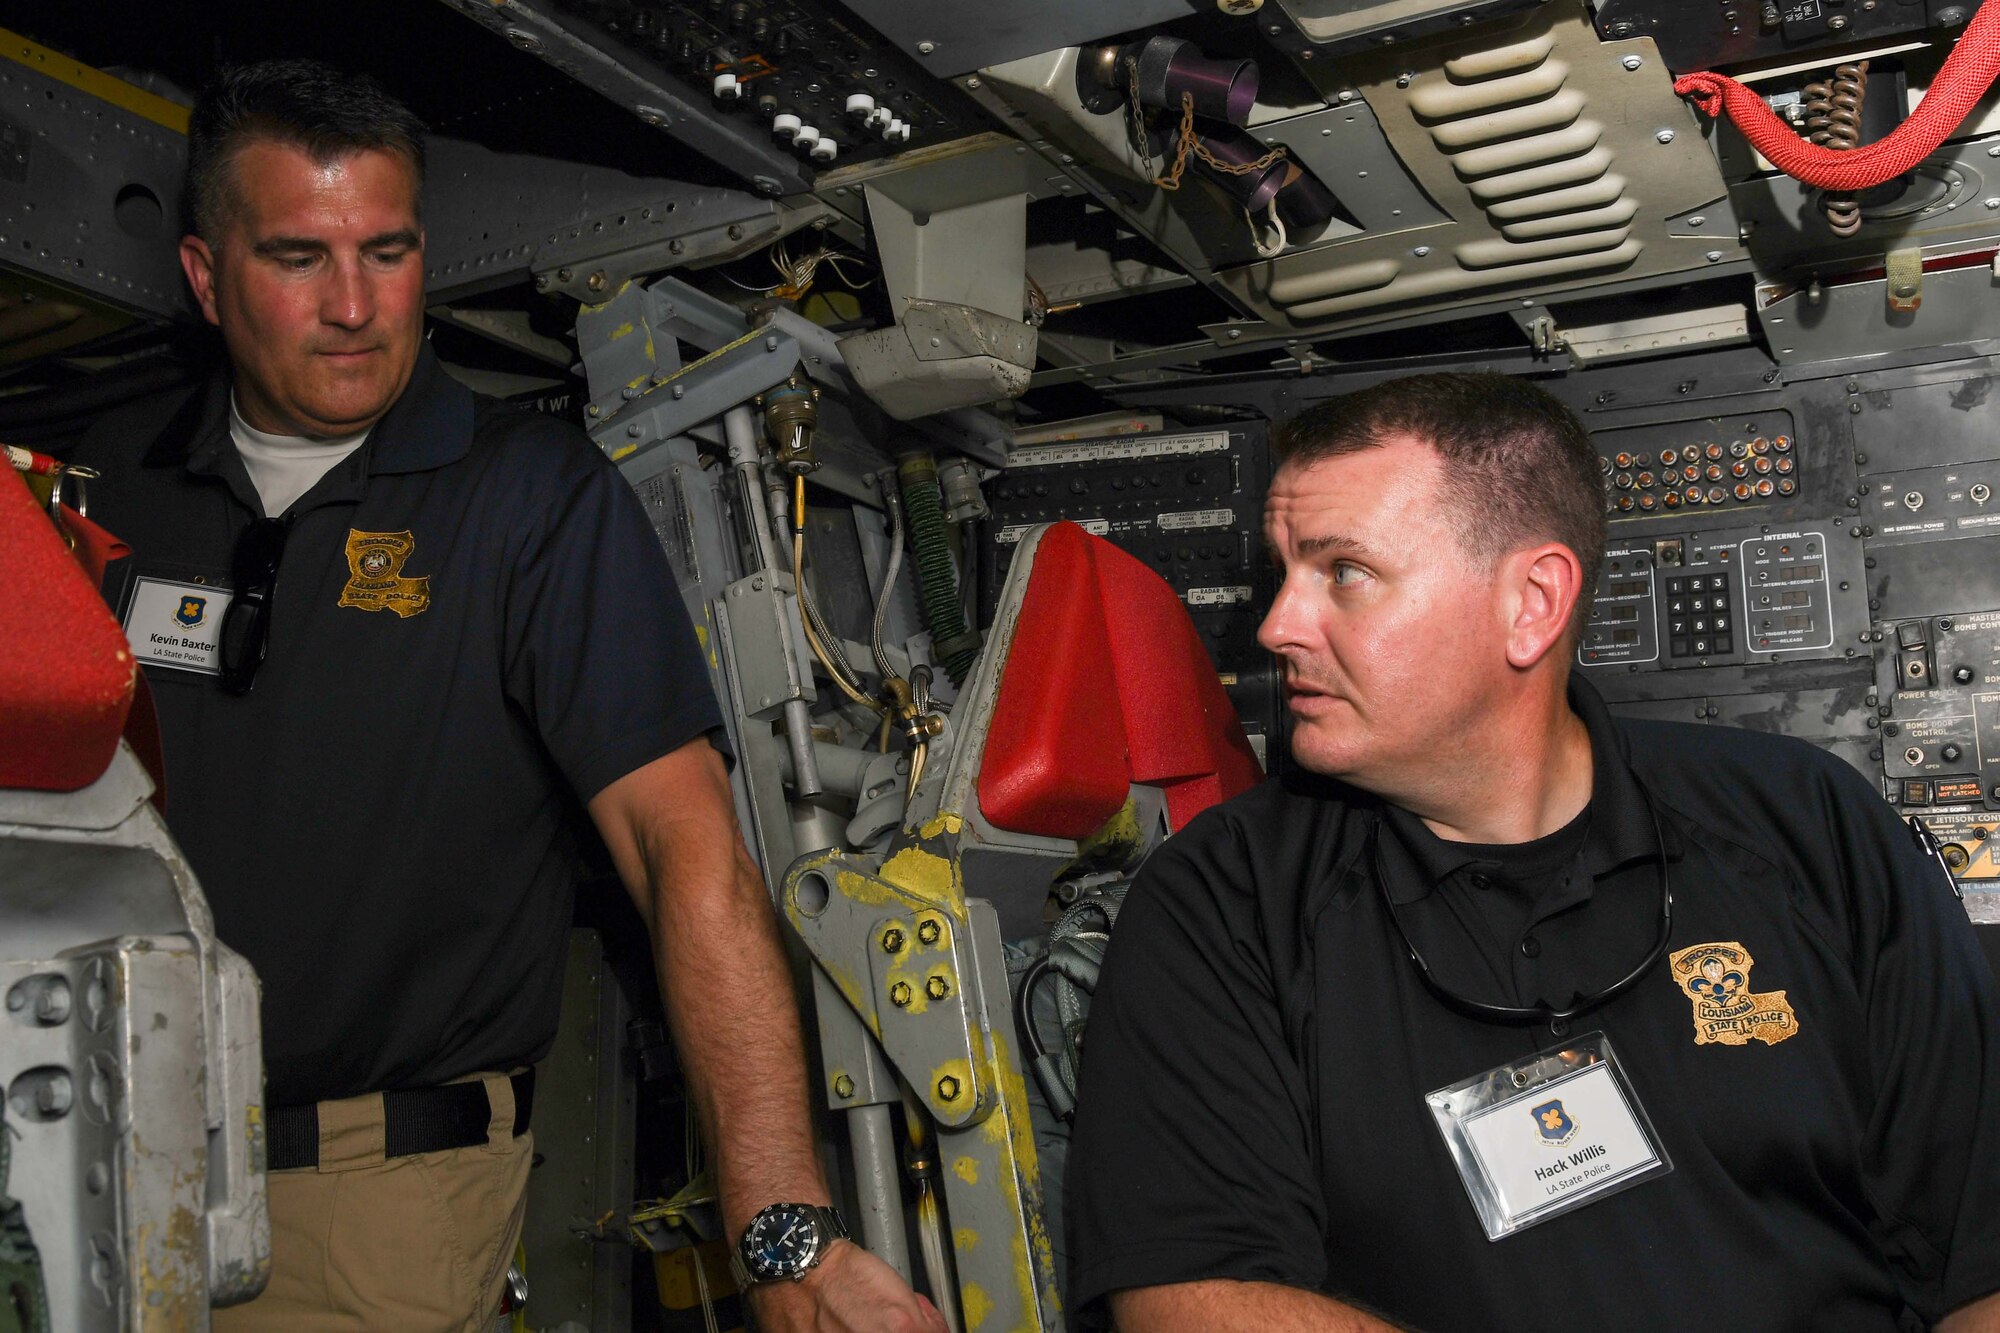 Kevin Baxter and Hack Willis, both with the Louisiana State Police, observe the interior of a B-52 Stratofortress at Barksdale Air Force Base, Louisiana, June 2, 2018.  They were on hand for the 307th Bomb Wing’s Employer Appreciation Day.  Reserve Citizen Airmen of the 307th BW nominated their employers to learn more about the unit’s mission.  (U.S. Air Force photo by Staff Sgt. Callie Ware/released)